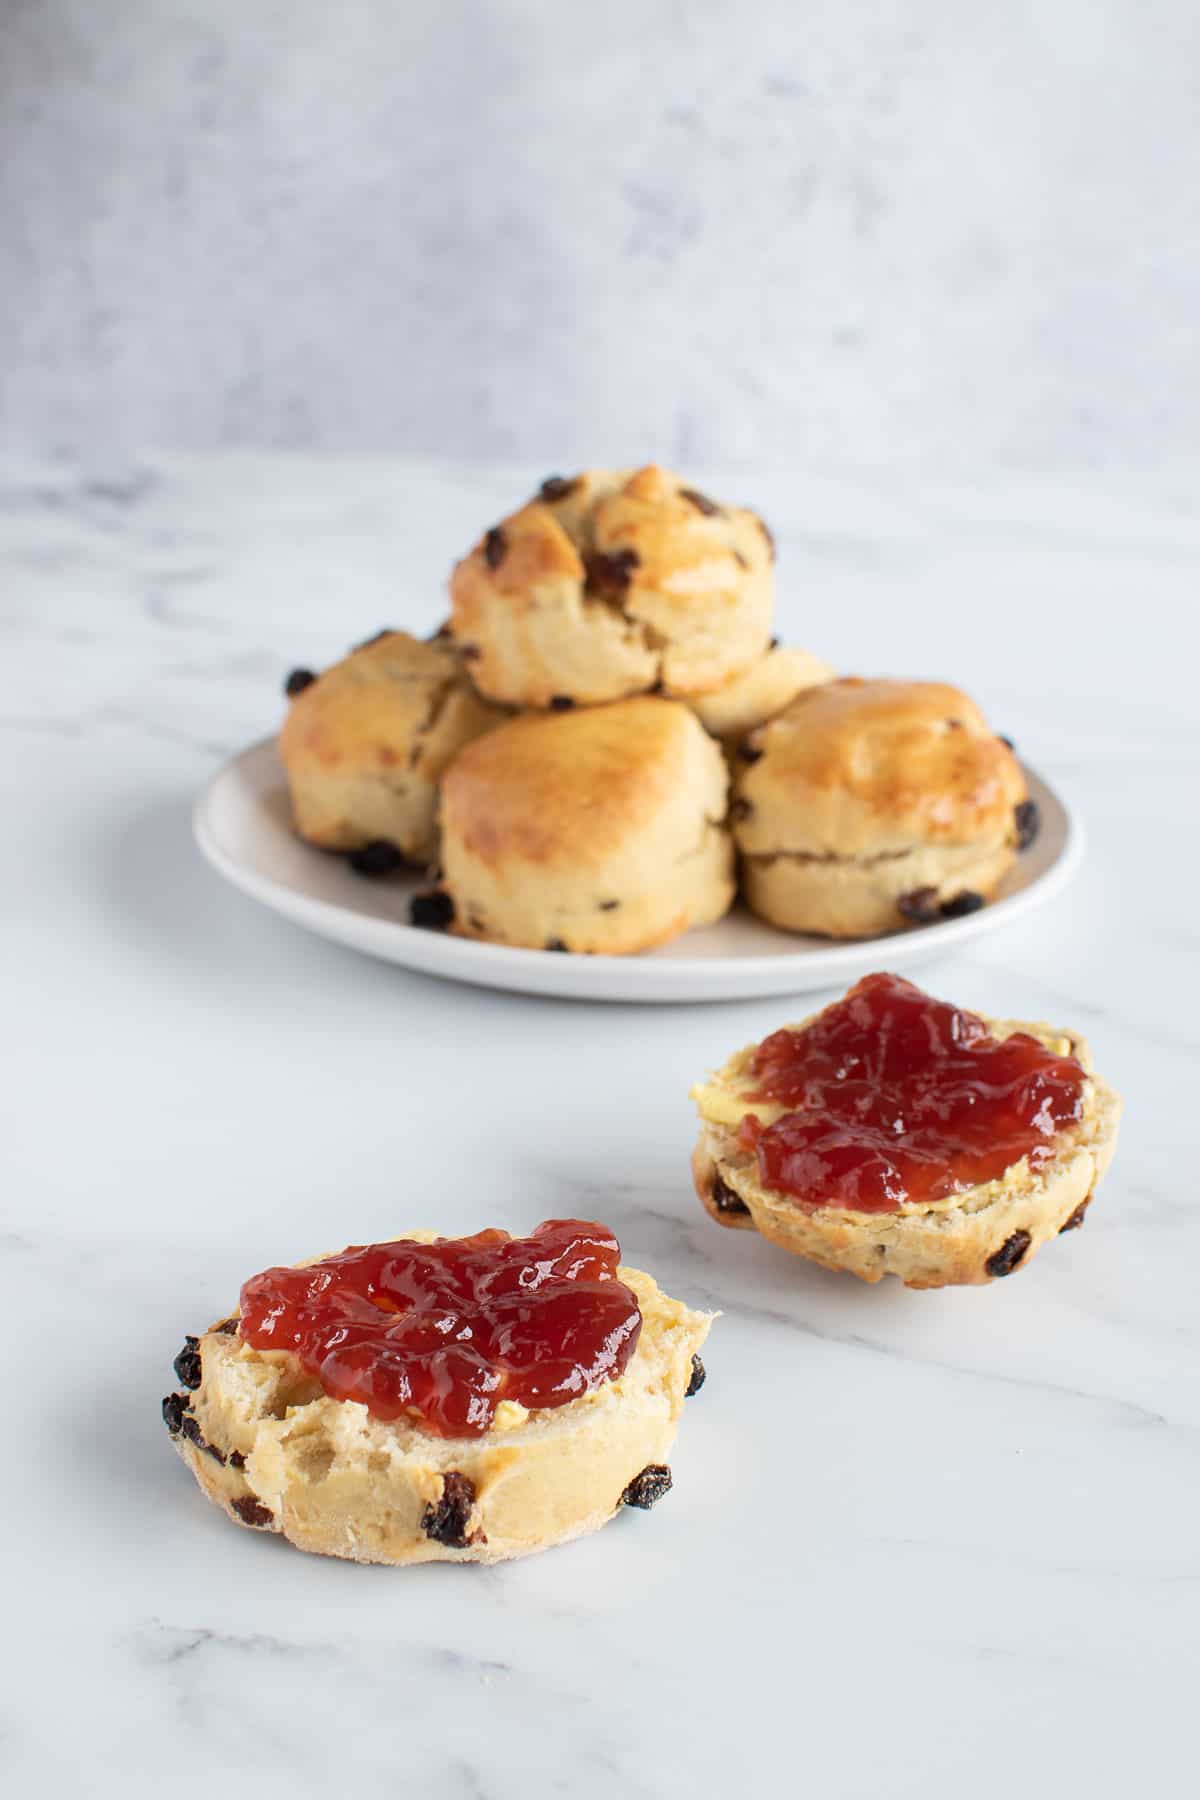 A stack of scones, with a scone sliced in half and filled with jam.